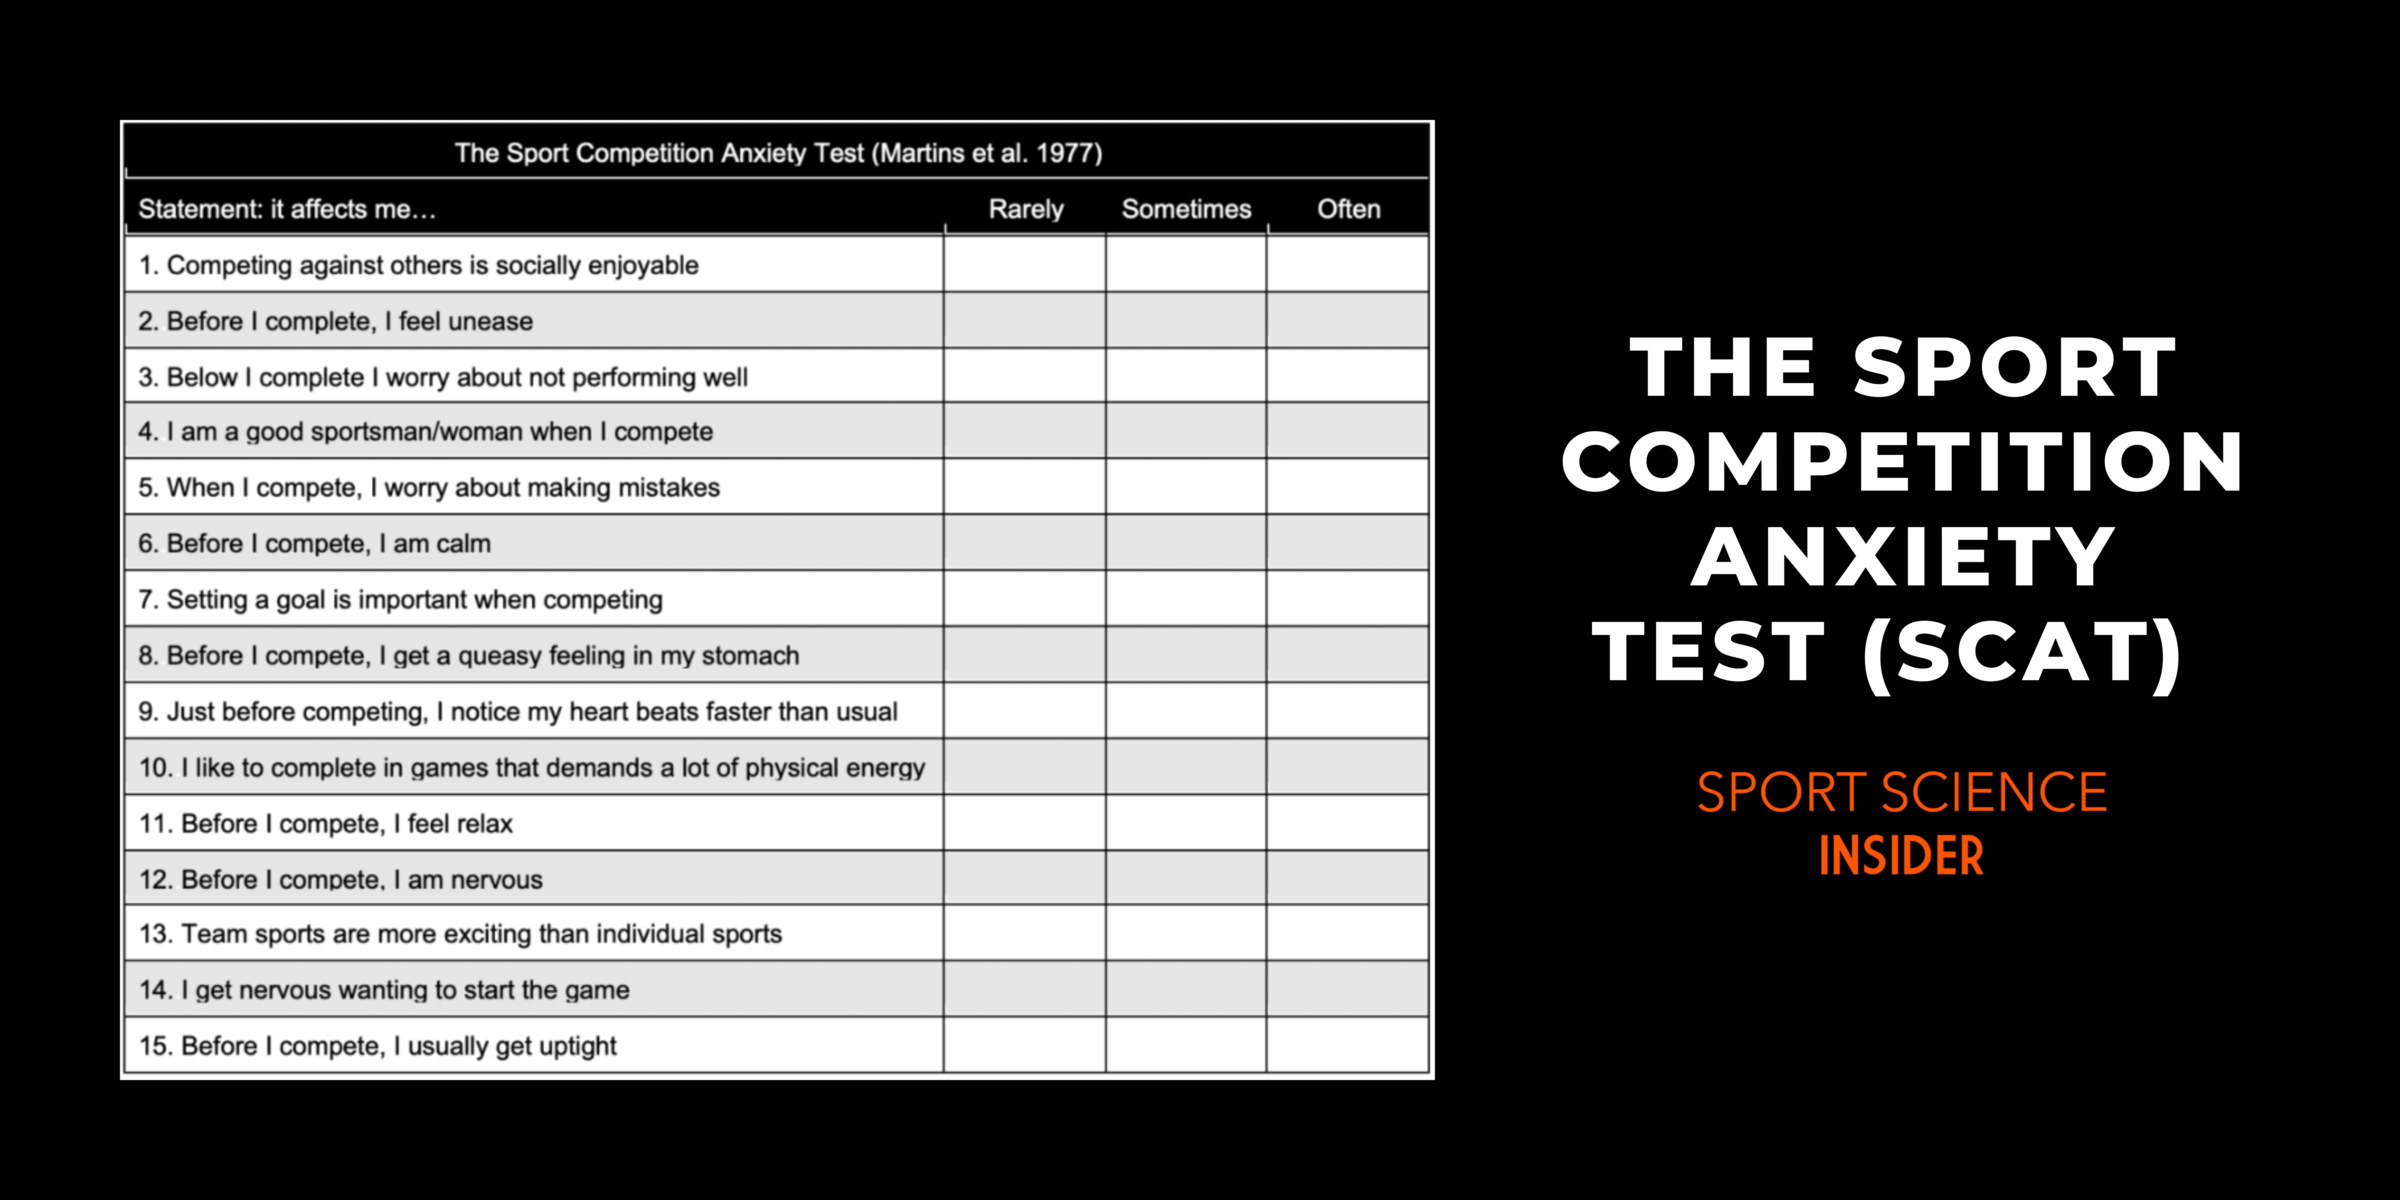 The Sport Competition Anxiety Test Questionnaire